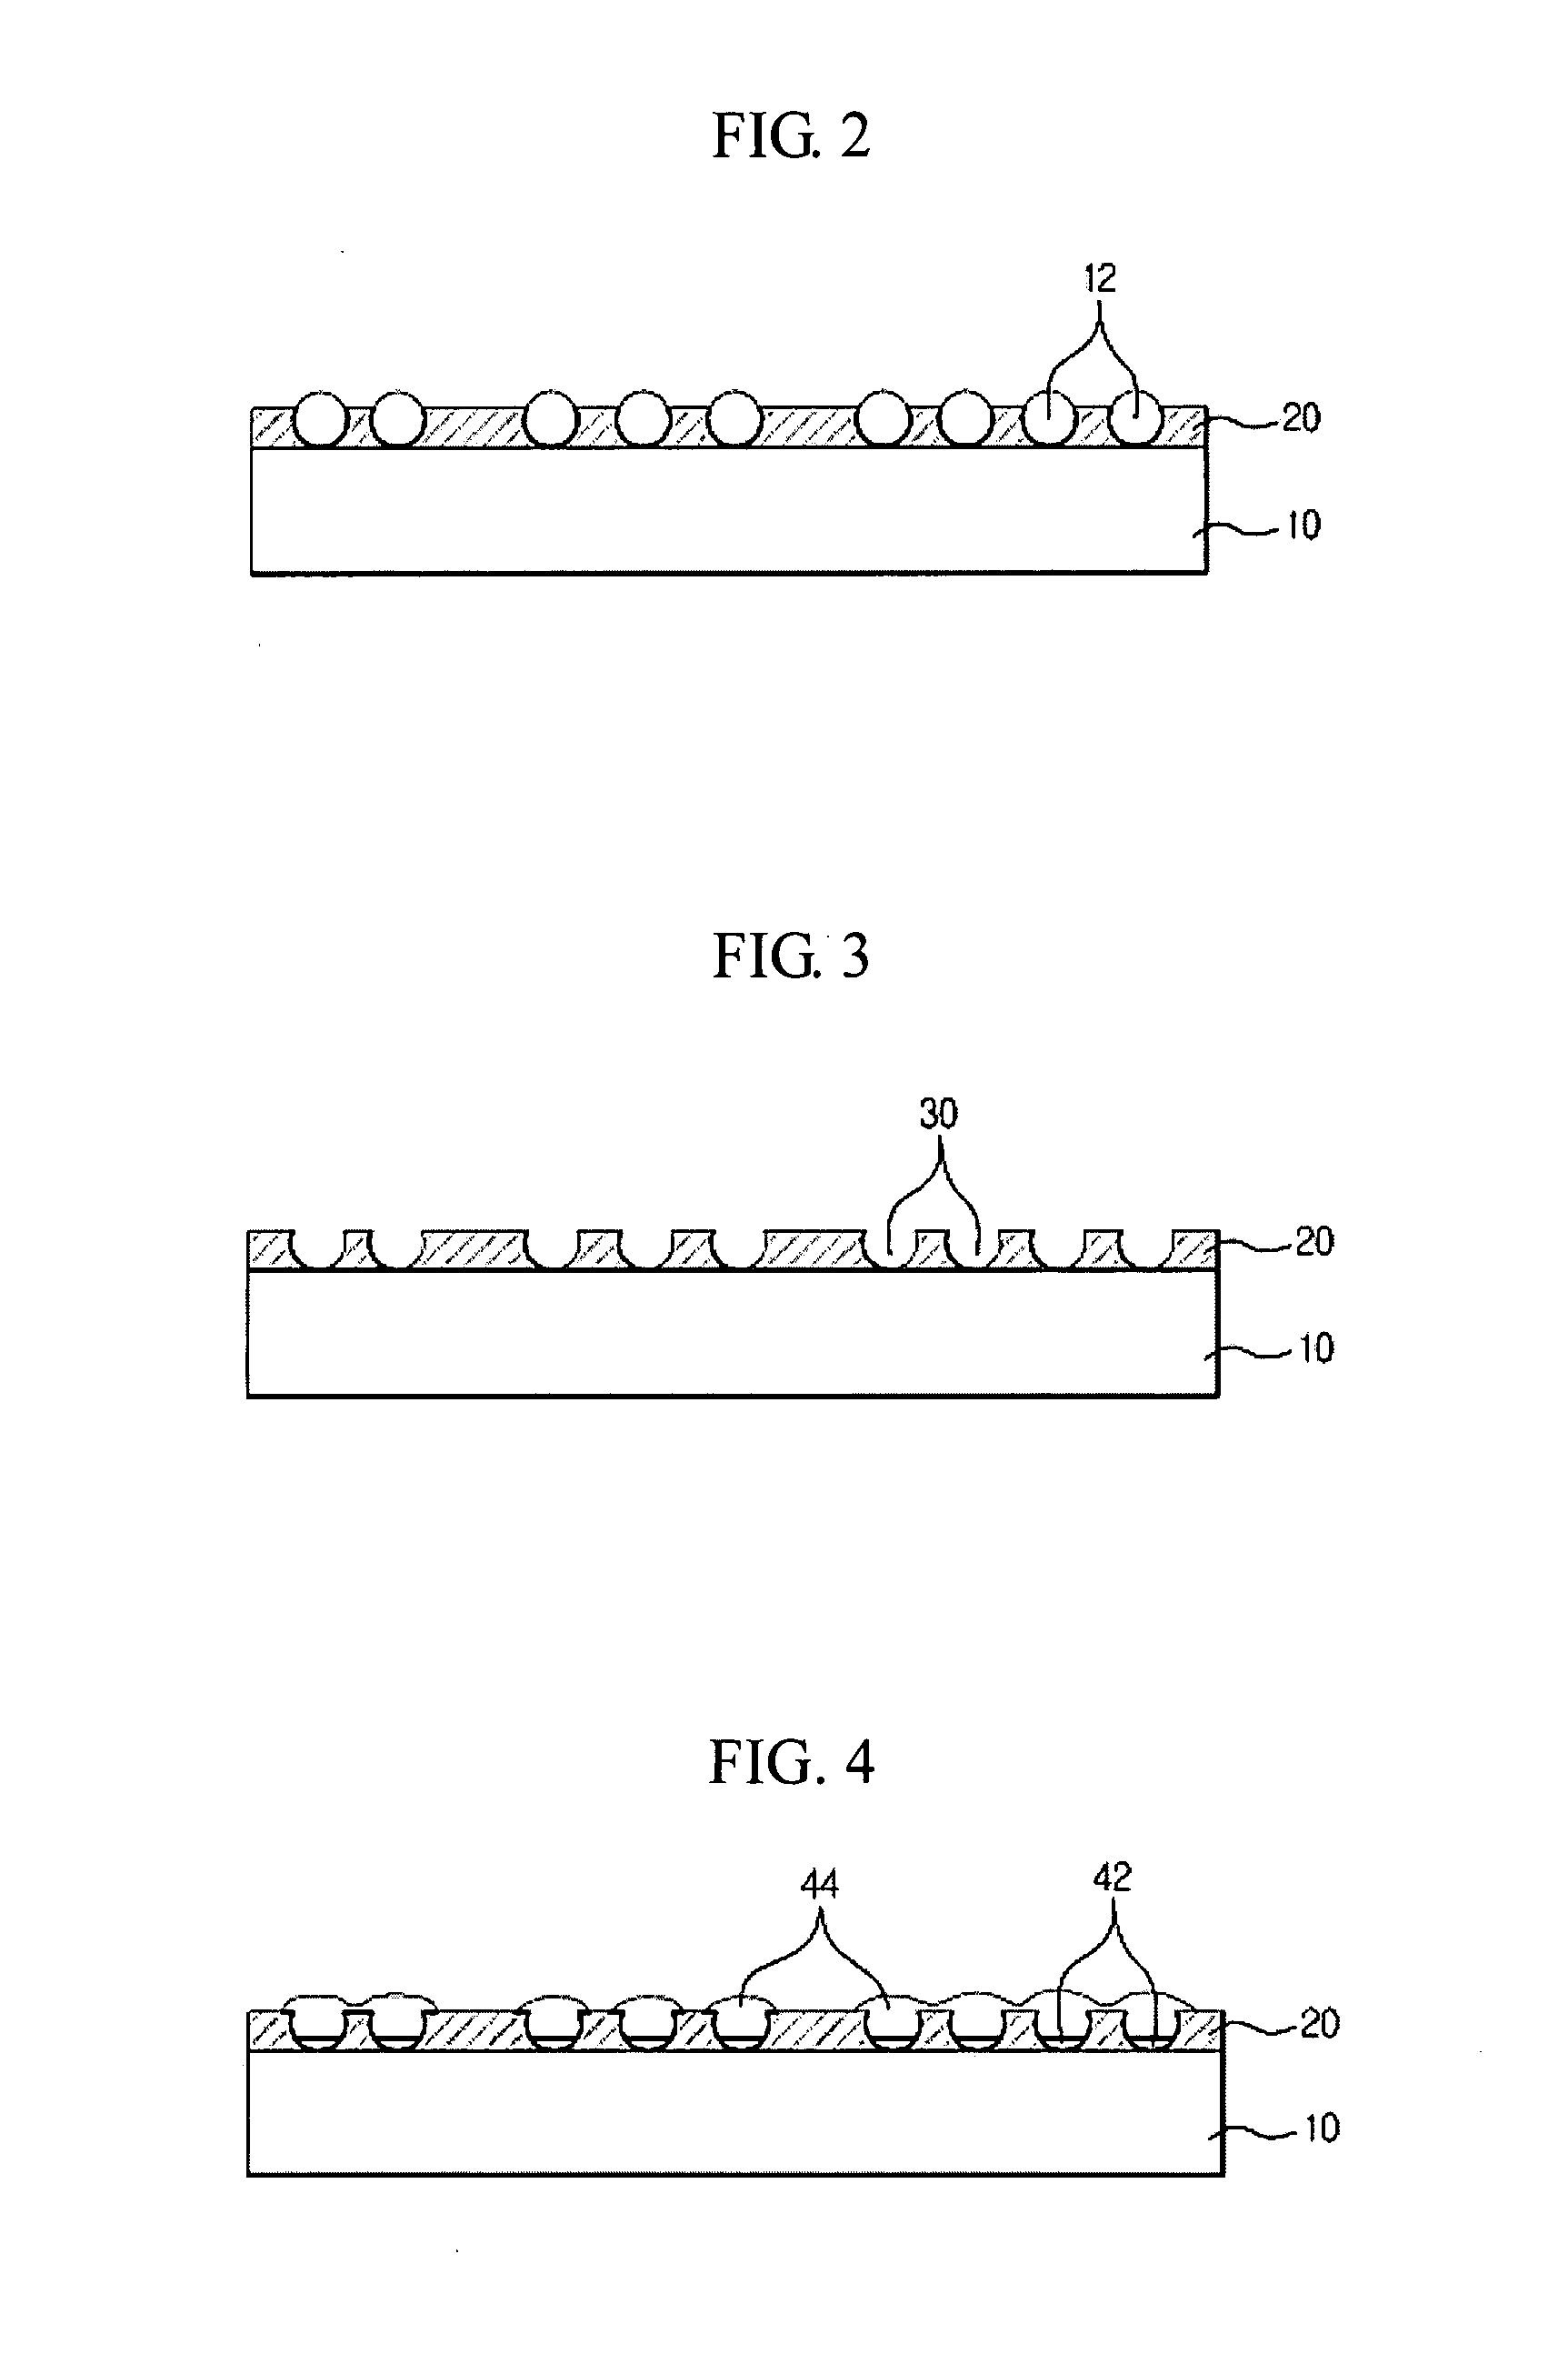 Compound semiconductor substrate grown on metal layer, method for manufacturing the same, and compound semiconductor device using the same